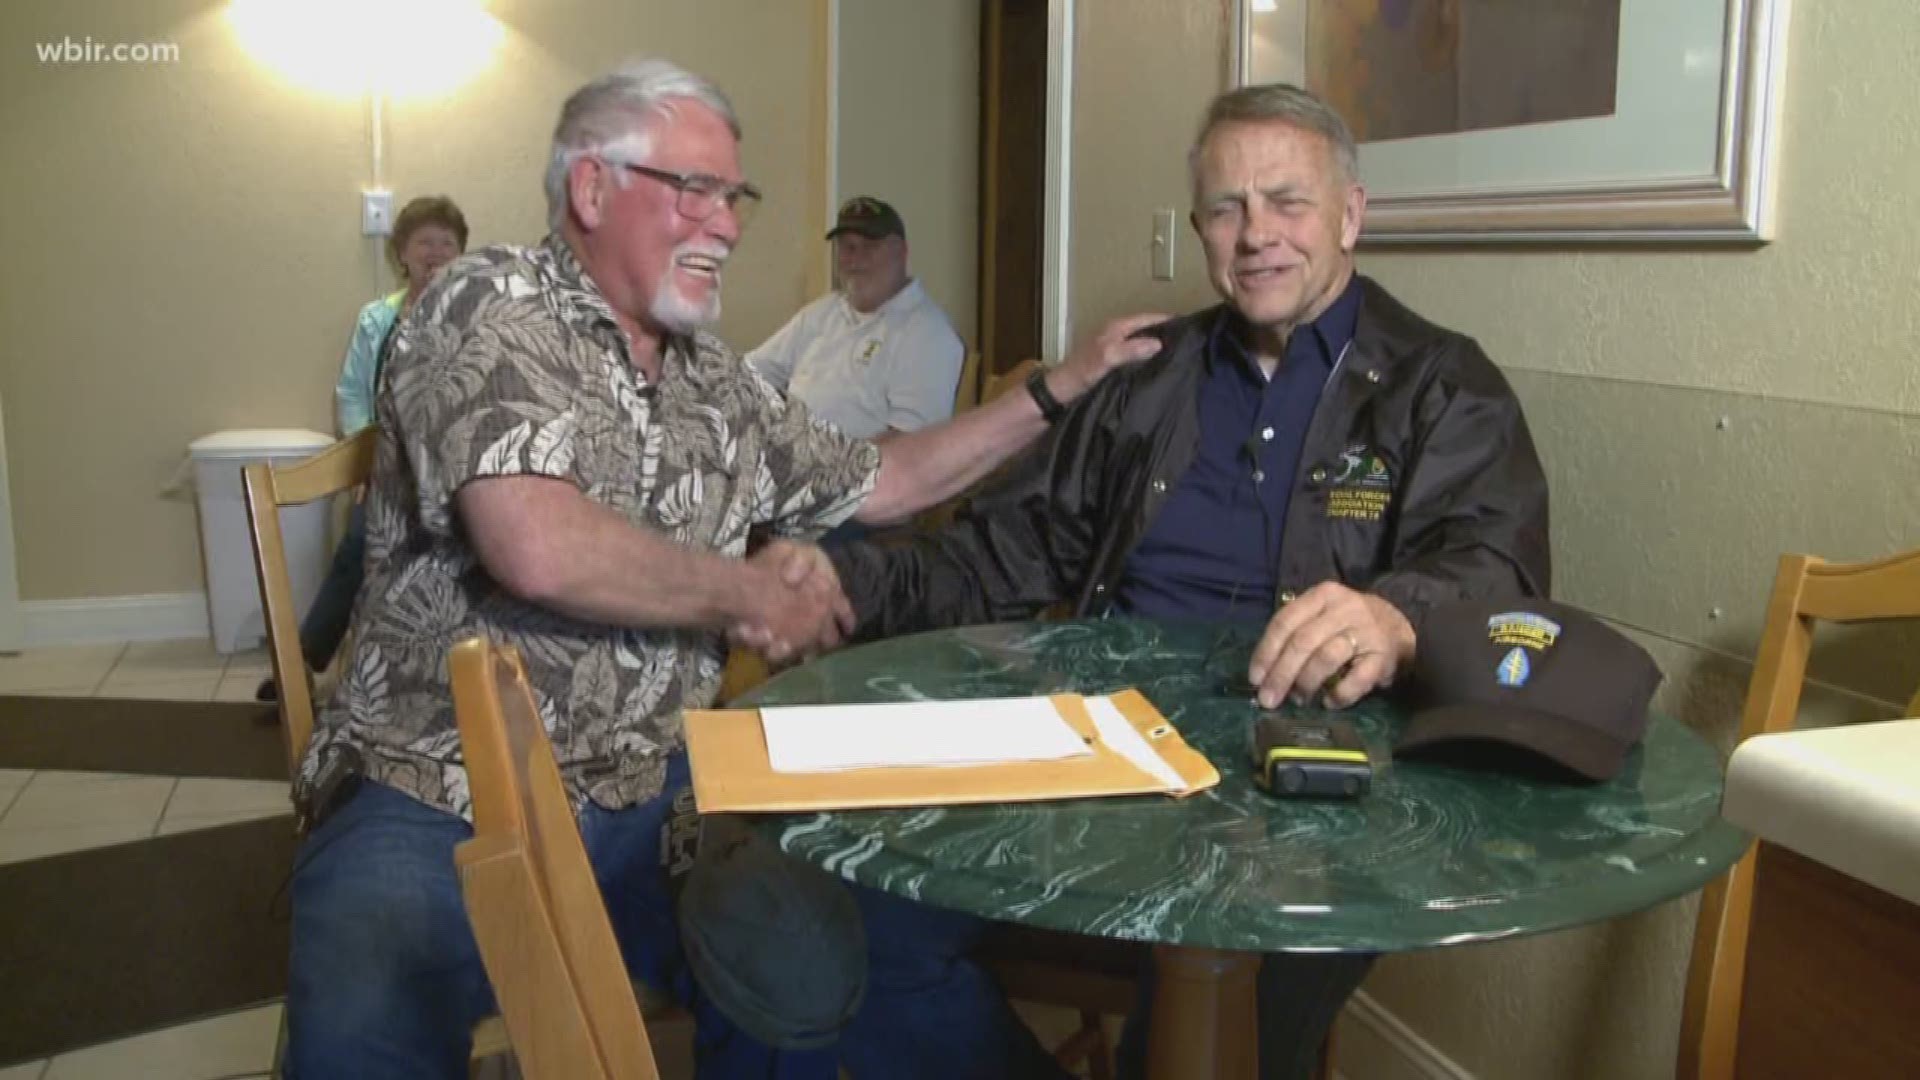 The internet and a little curiosity get the credit for helping two veterans reconnect after 50 years. (Originally aired May 3, 2018)